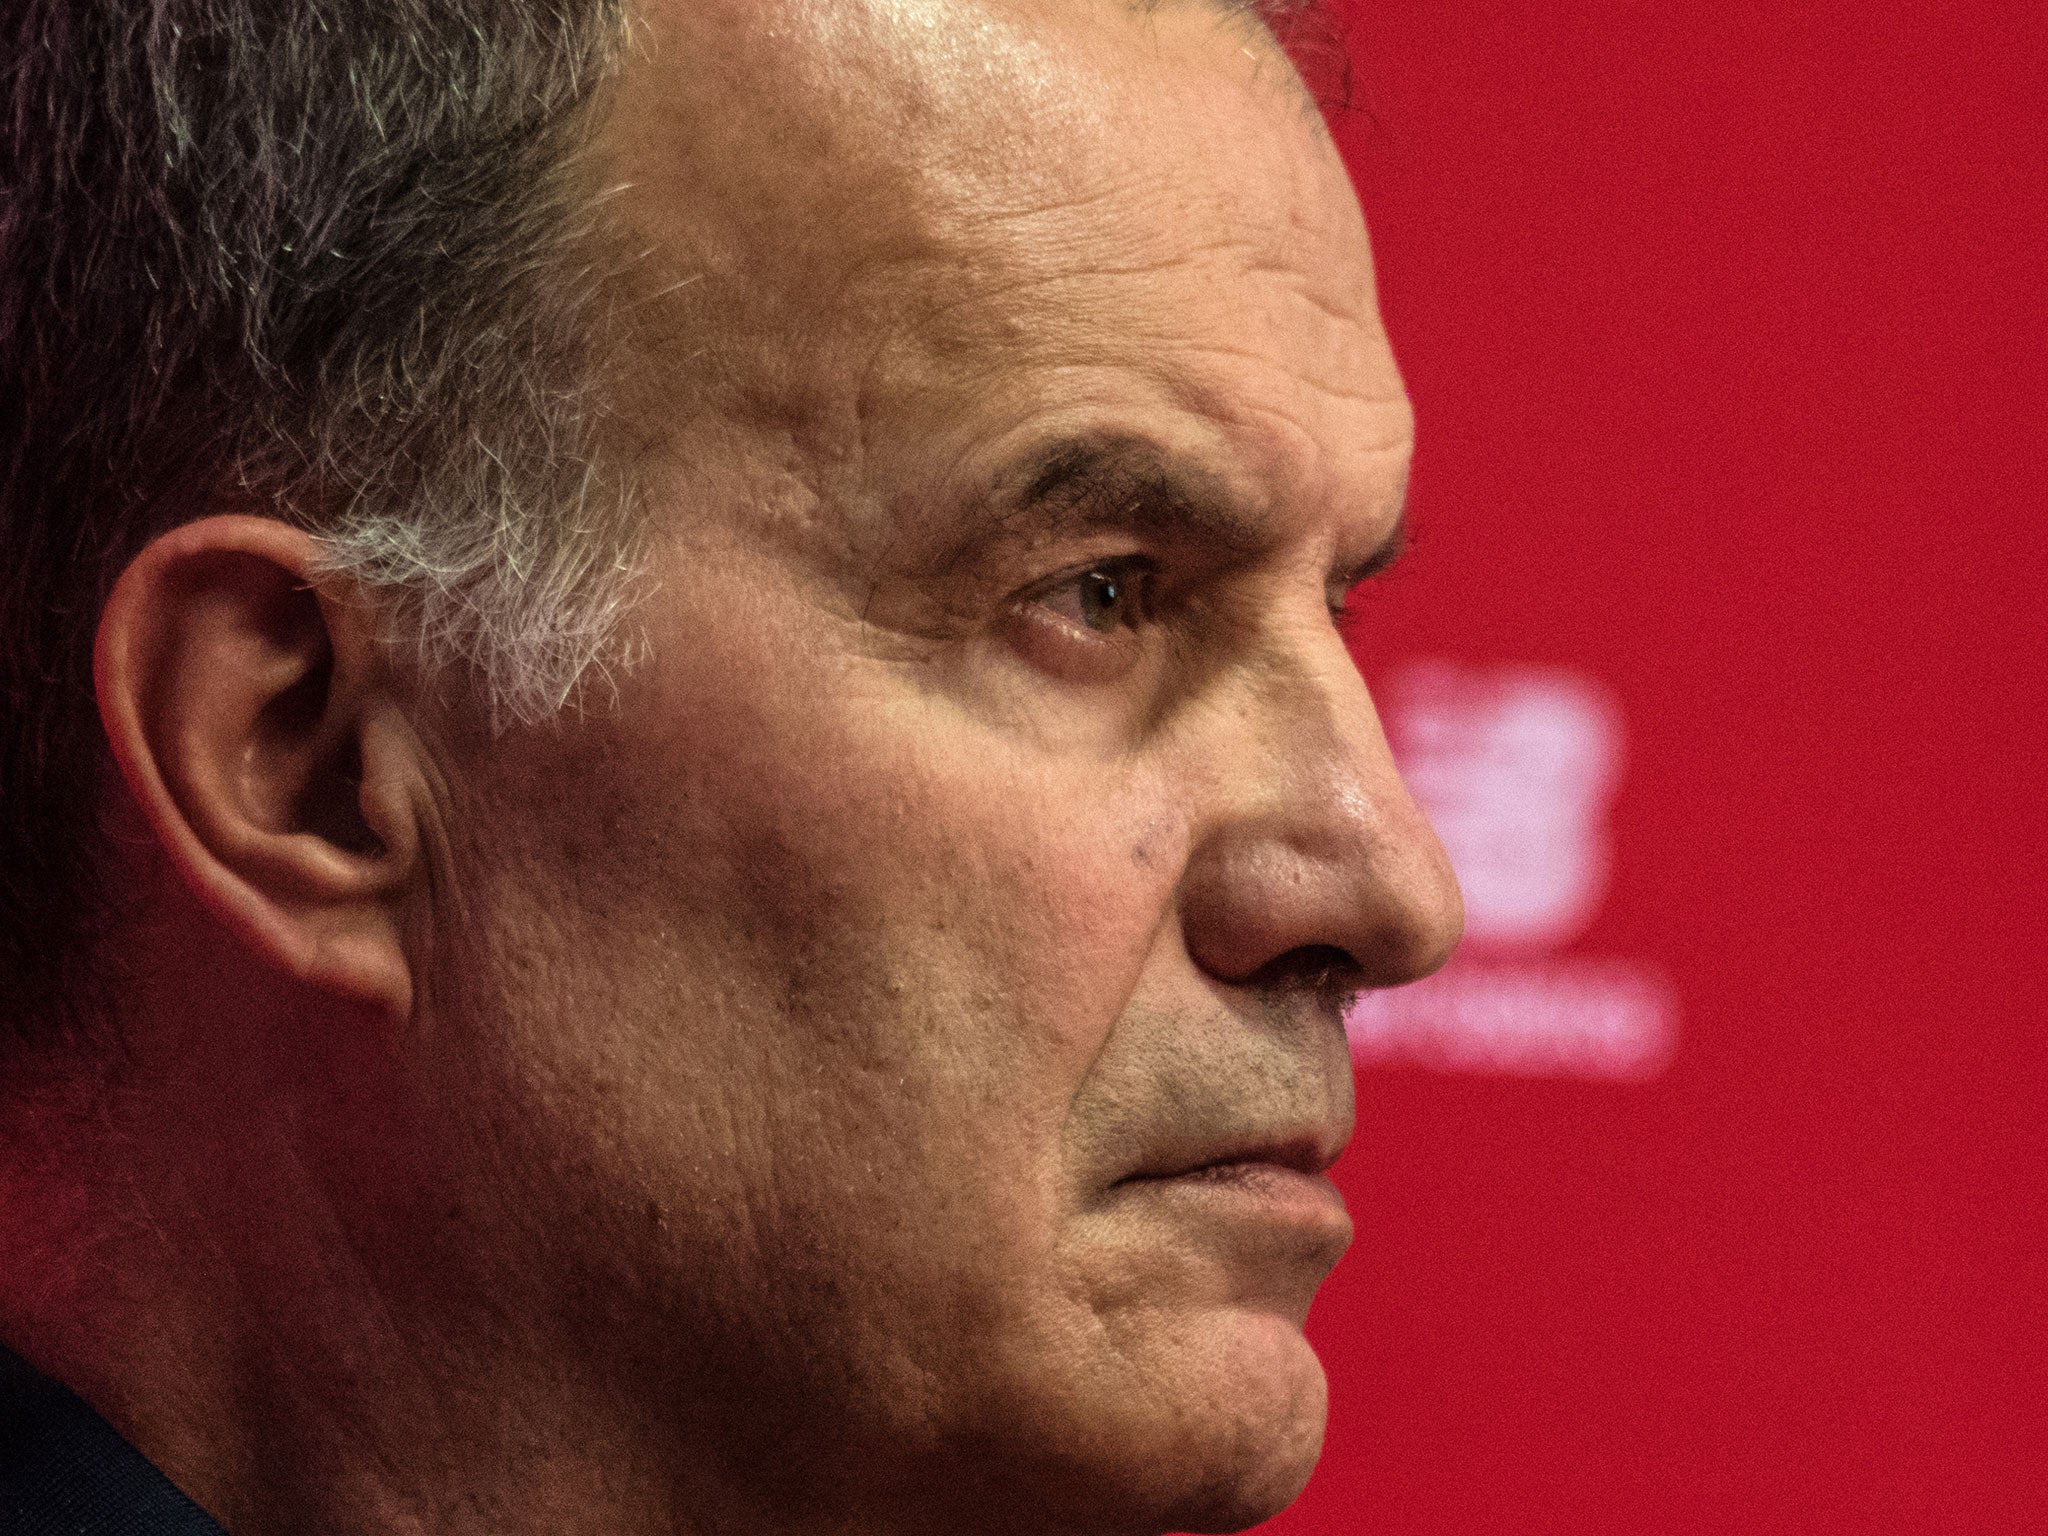 Marcelo Bielsa was unveiled as Lille's new coach on Tuesday afternoon